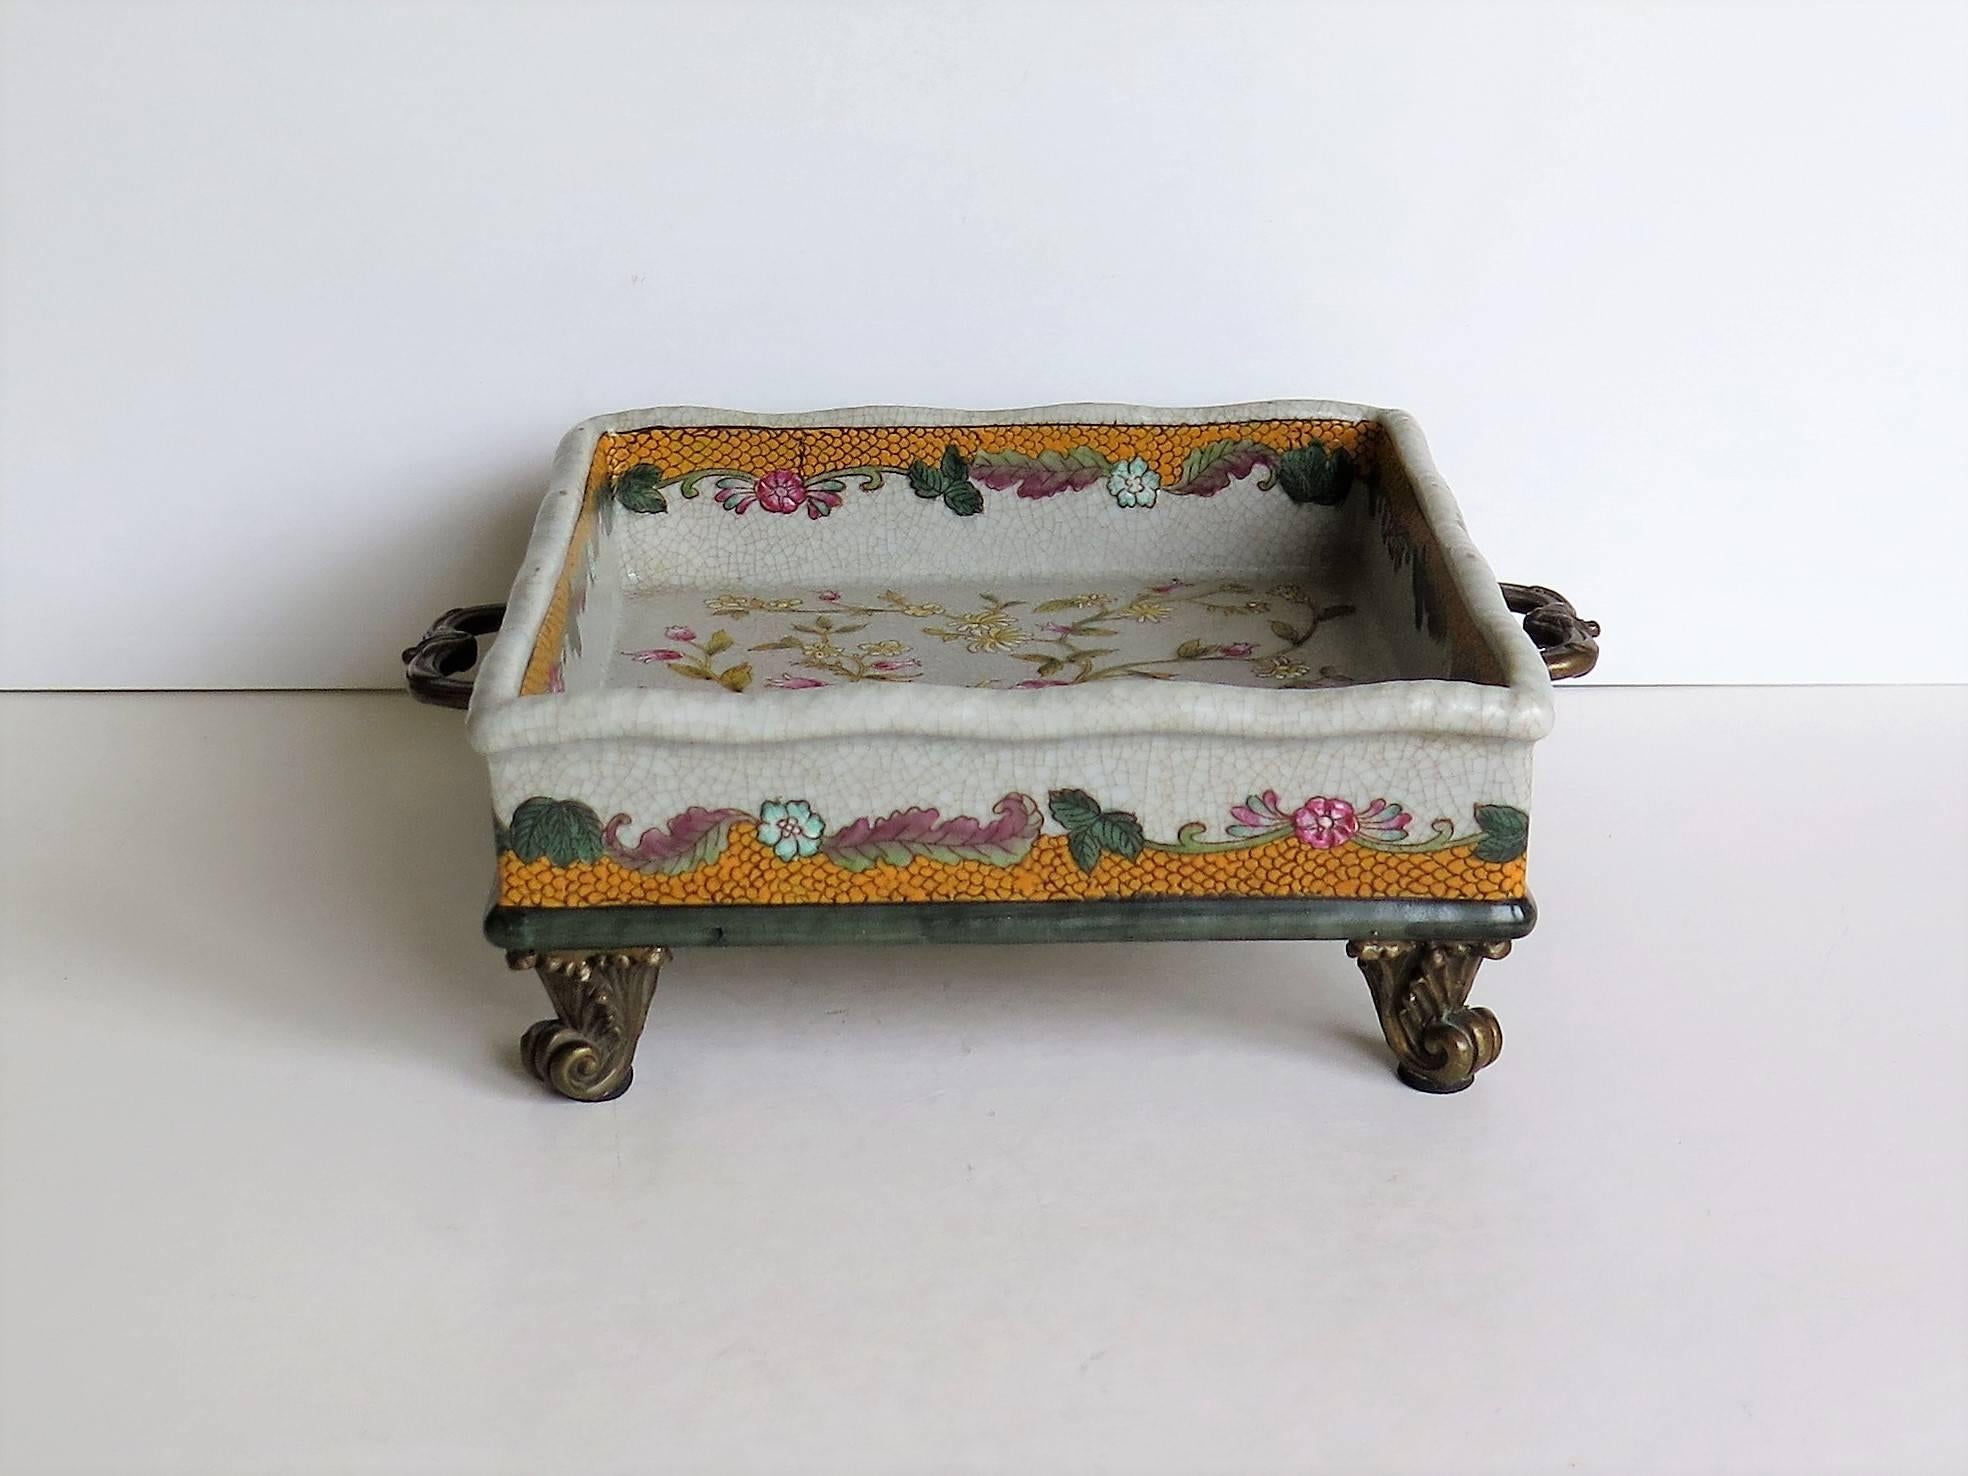 Cast Chinese Export Ceramic Tray or Dish Famille Rose Hand Painted,  20th Century